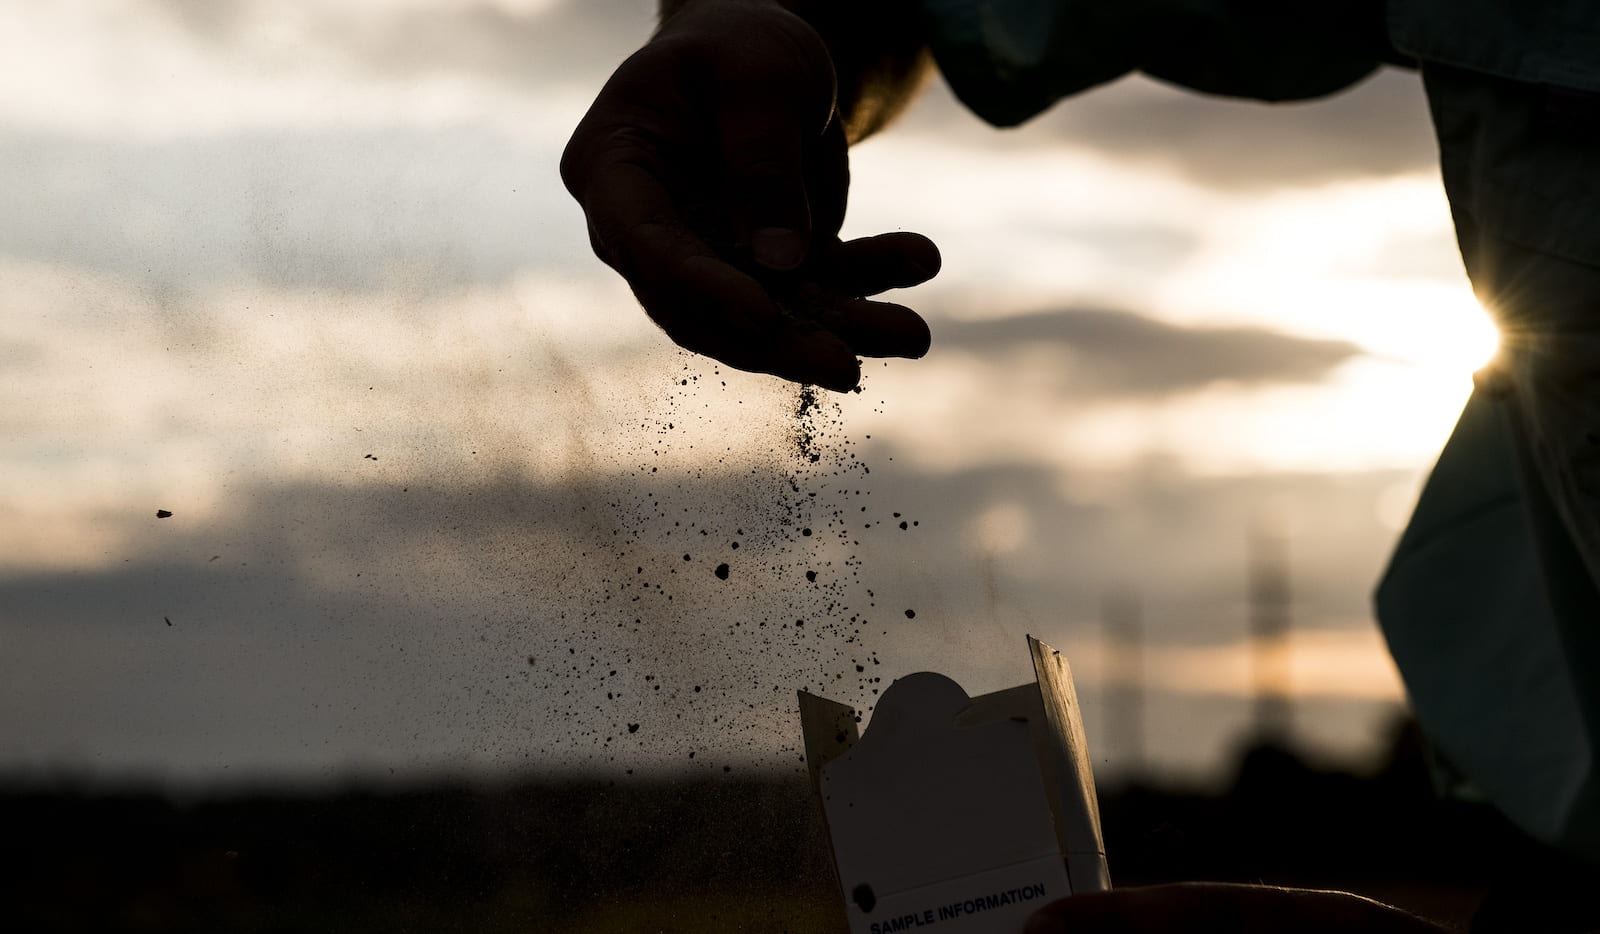 A person's hands silhouetted against a sunset, with one hand scattering fine soil particles and the other holding a box